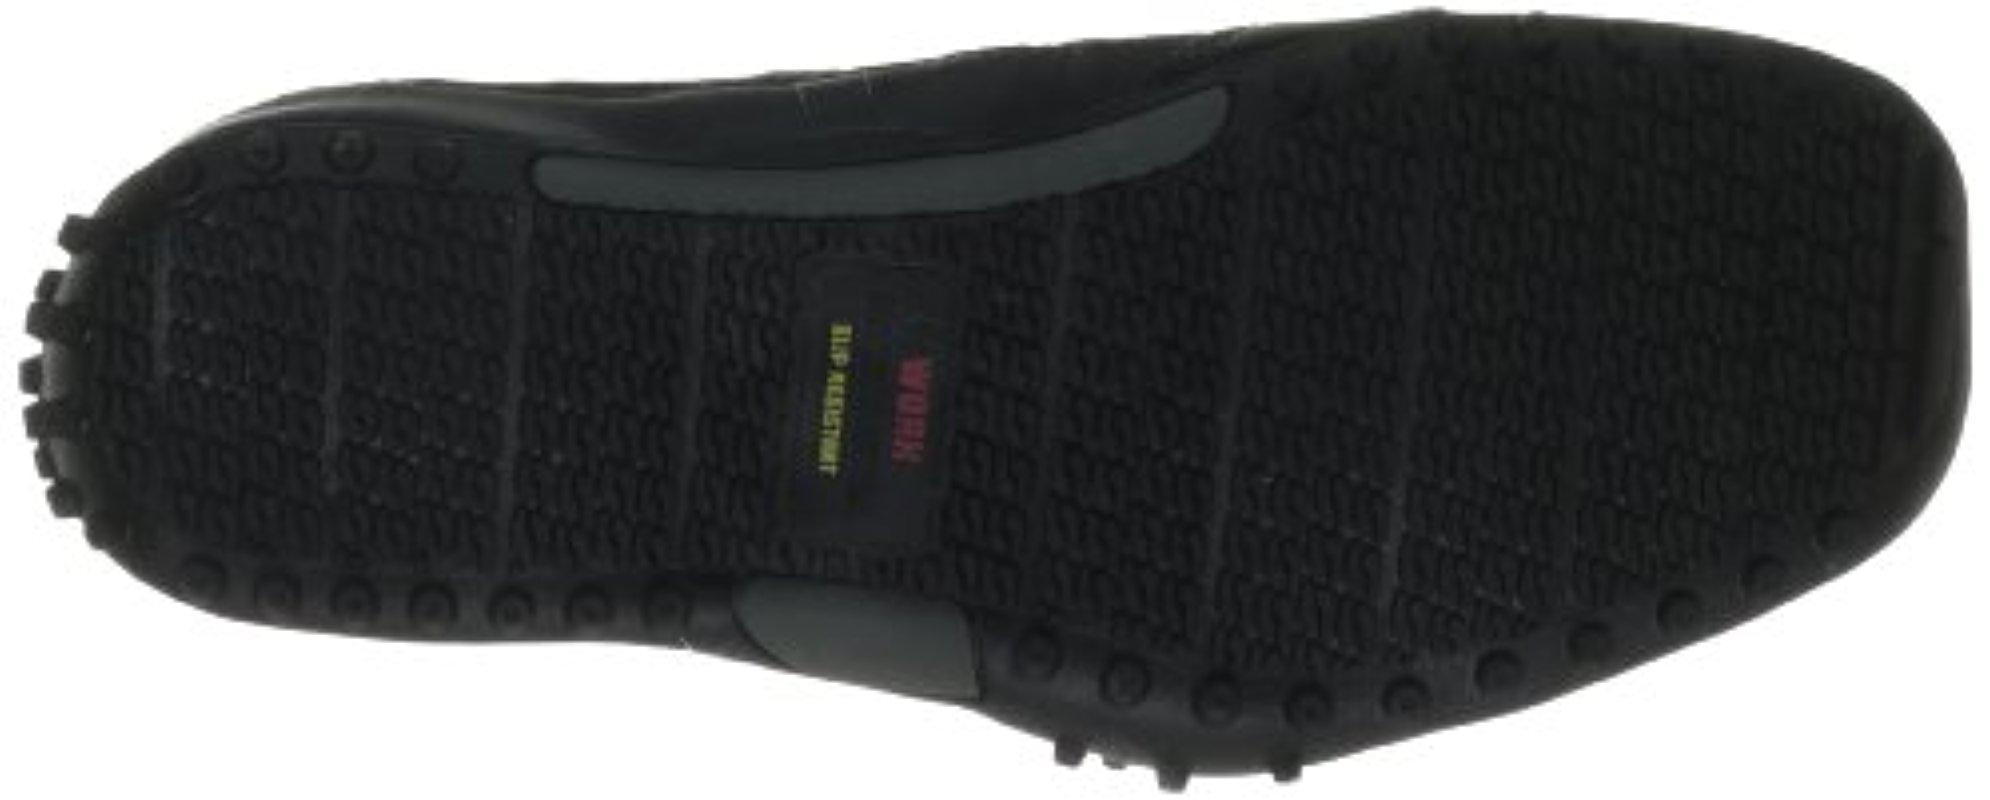 skechers rockland systemic